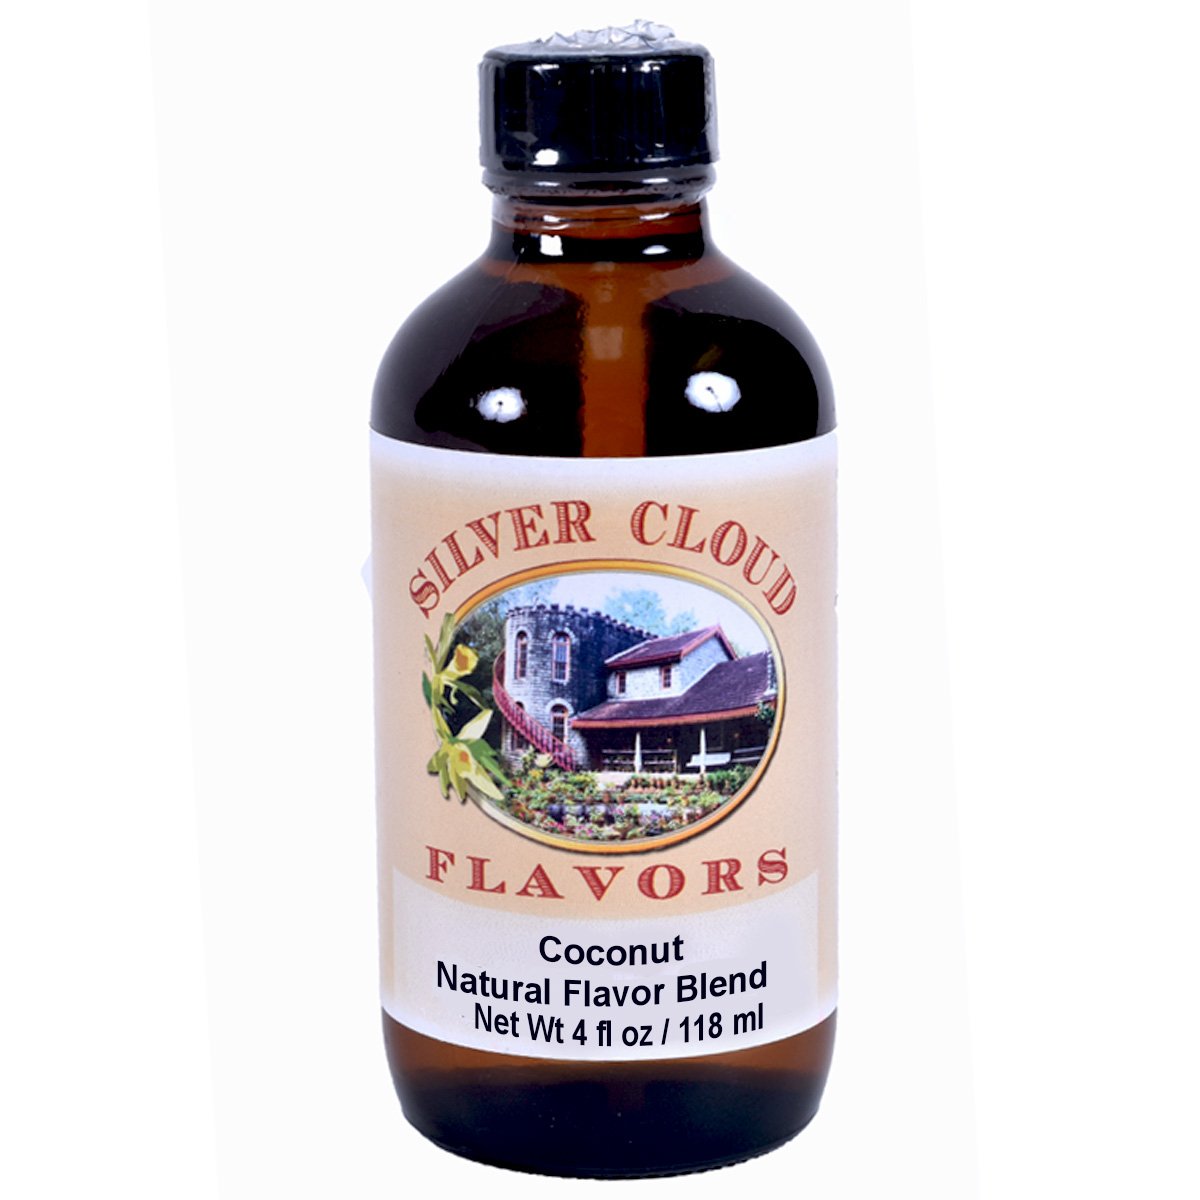 Coconut, Natural Flavor Blend Silver Cloud Extract - Bake Supply Plus